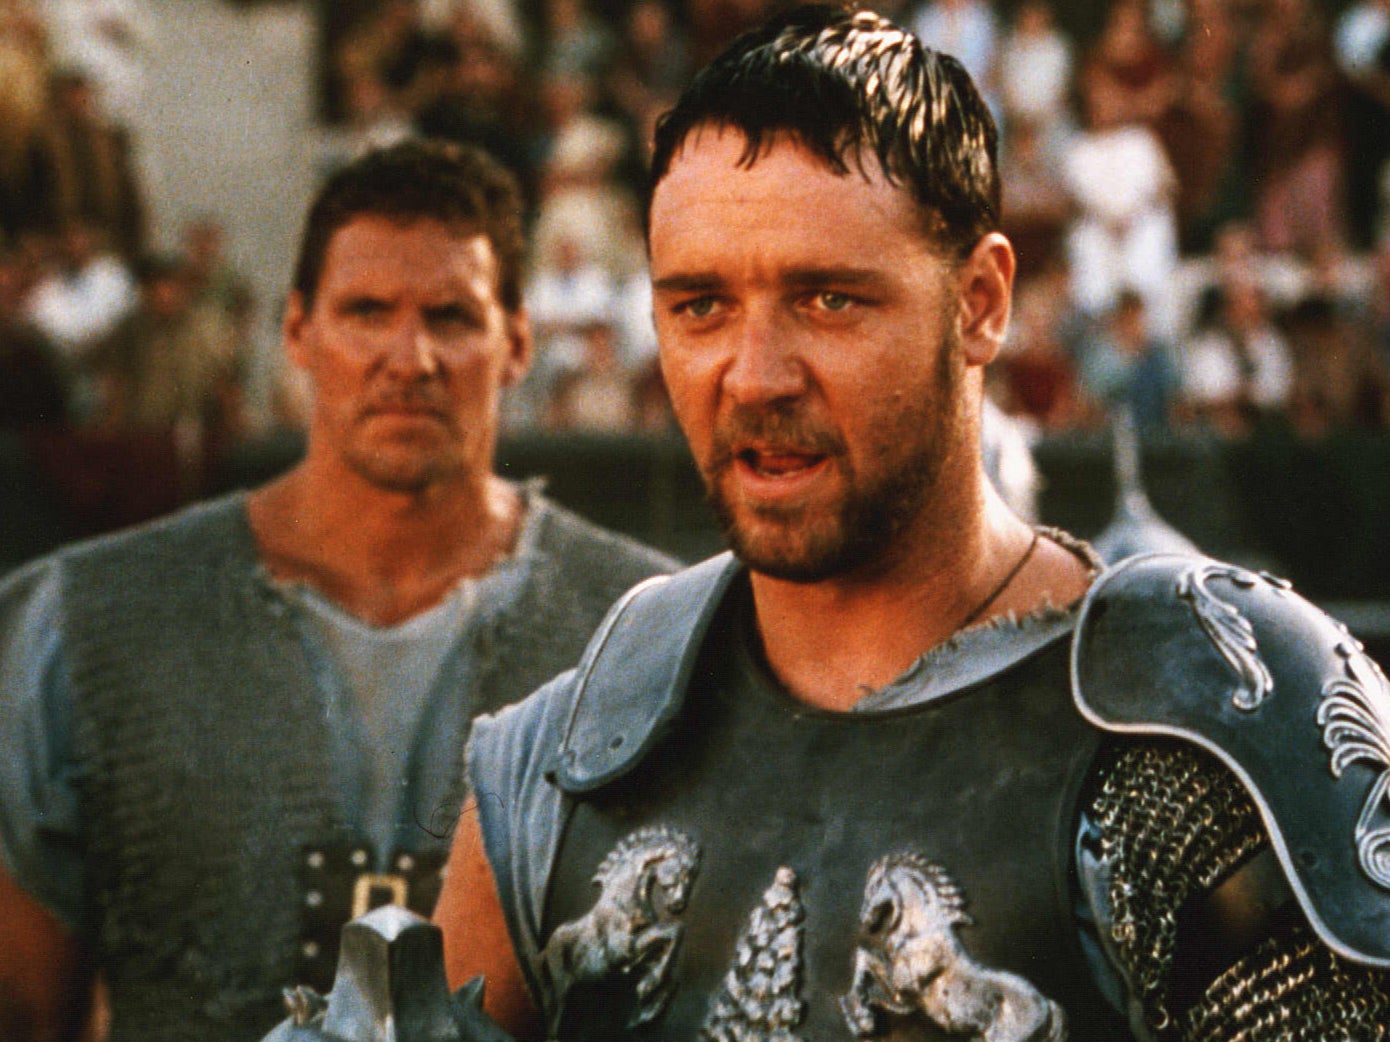 Russell Crowe in Ridley Scott’s ‘Gladiator’ in 2000